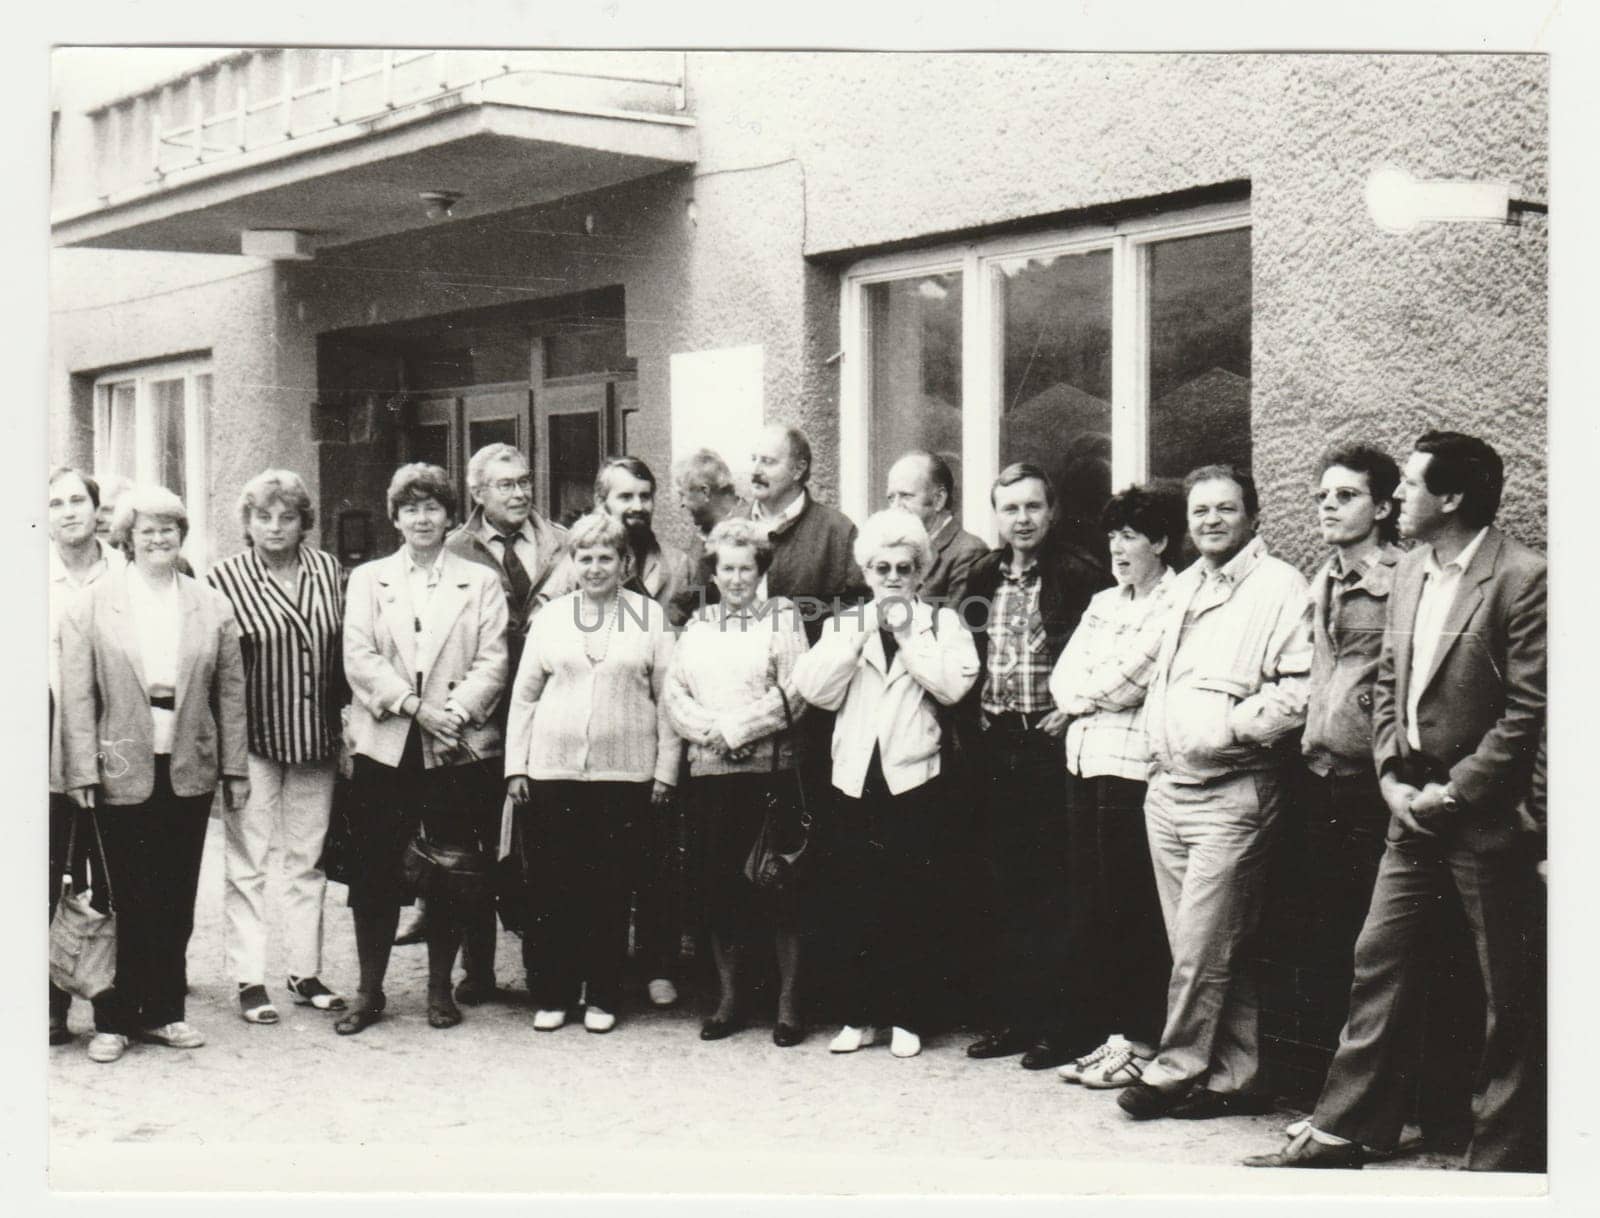 THE CZECHOSLOVAK SOCIALIST REPUBLIC - CIRCA 1980s: Vintage photo shows a group of people poses outdoors. Retro black and white photography. Circa 1980s.